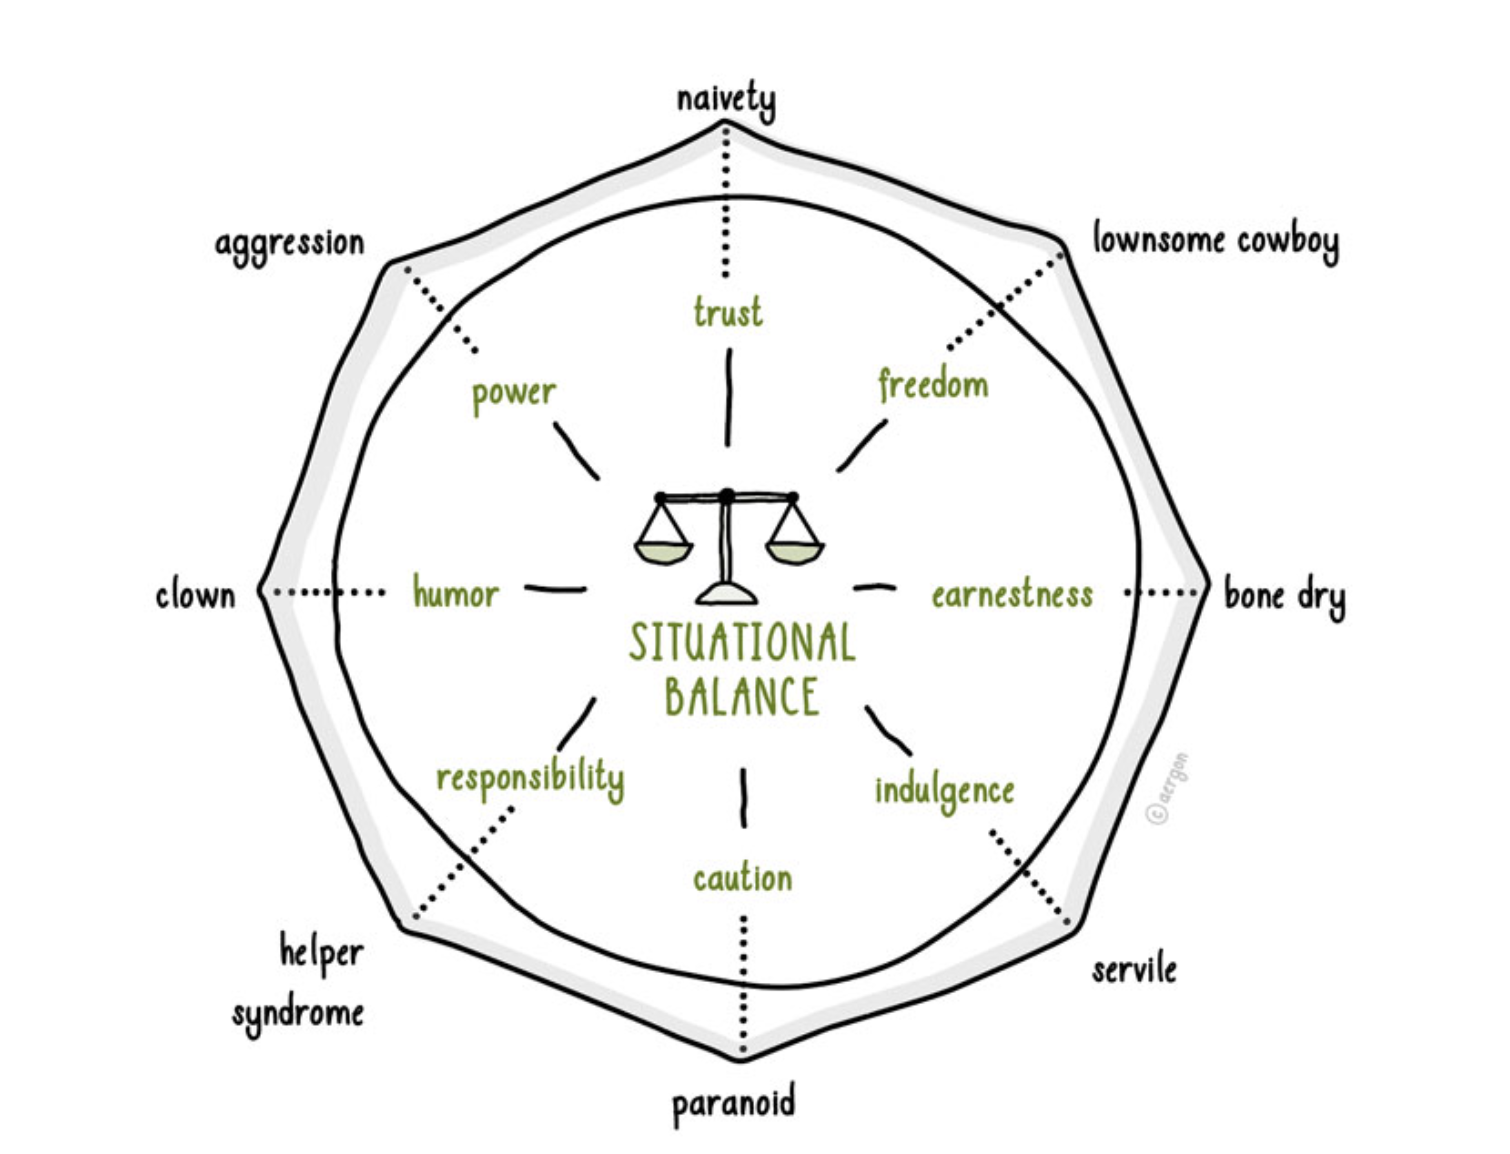 Dynamic balance of values and the associated behaviors (adapted from Bernhard Possert)